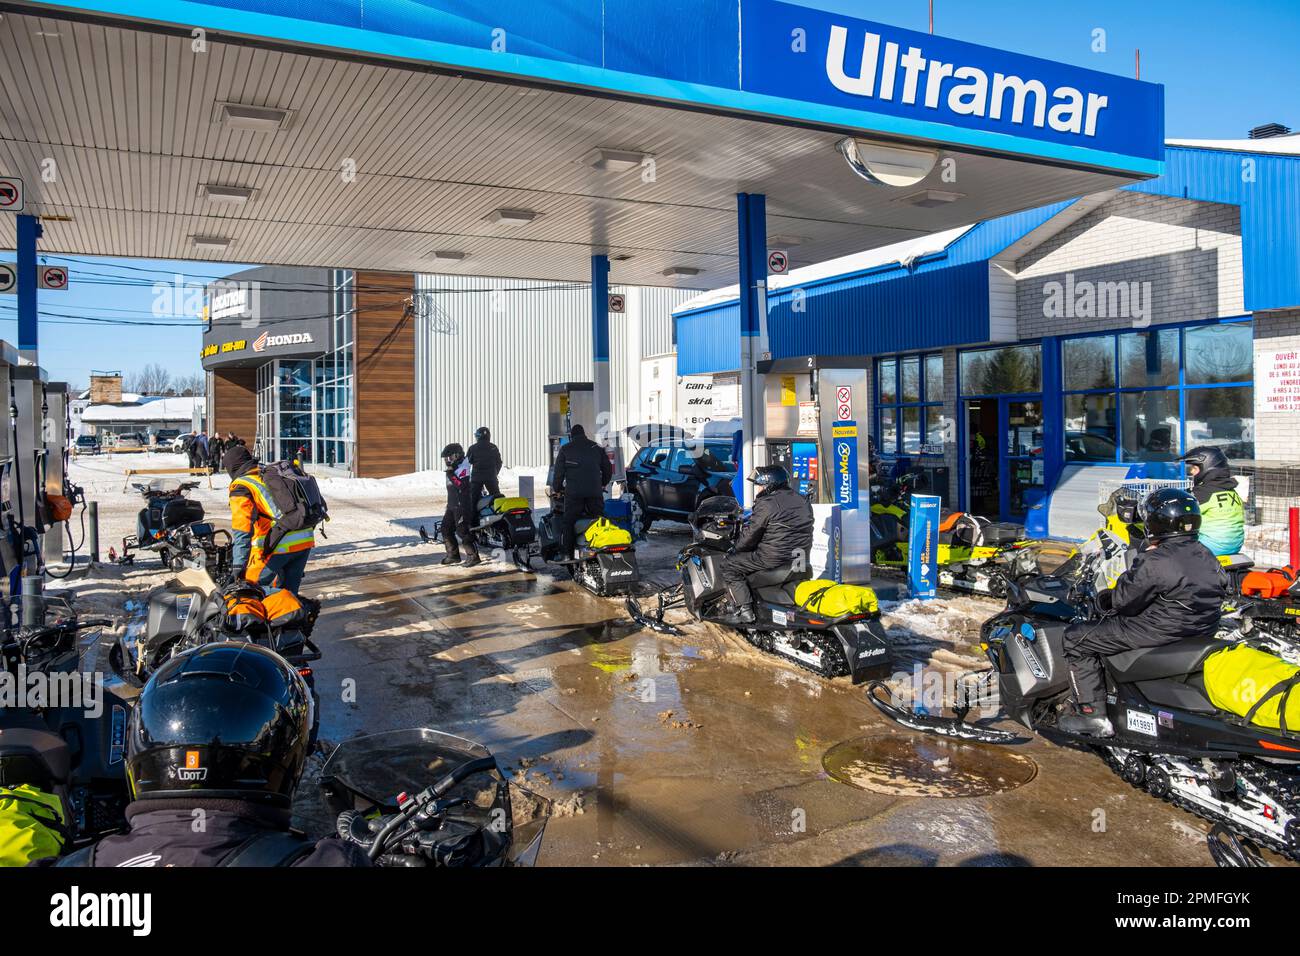 Canada, Quebec Province, Saint Michel des Saints, service station, snowmobiles fill up with gas Stock Photo